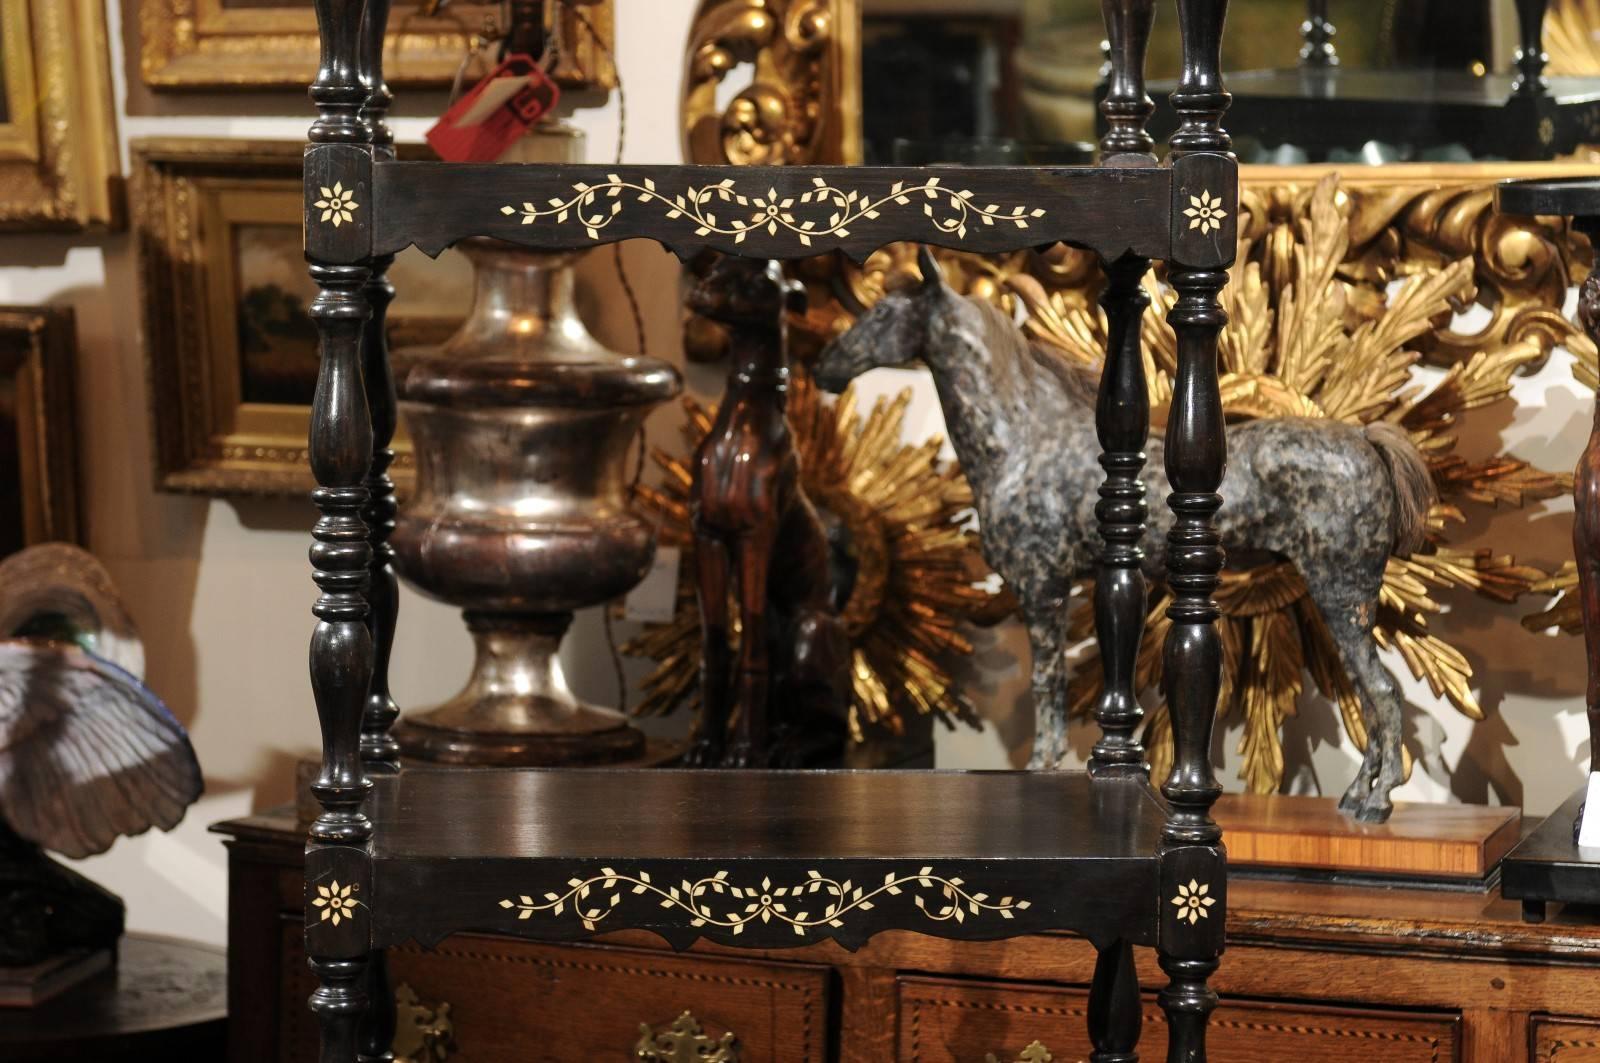 Ebonized Wood Etagère with Floral Bone Inlay Decor from the Early 19th Century 3